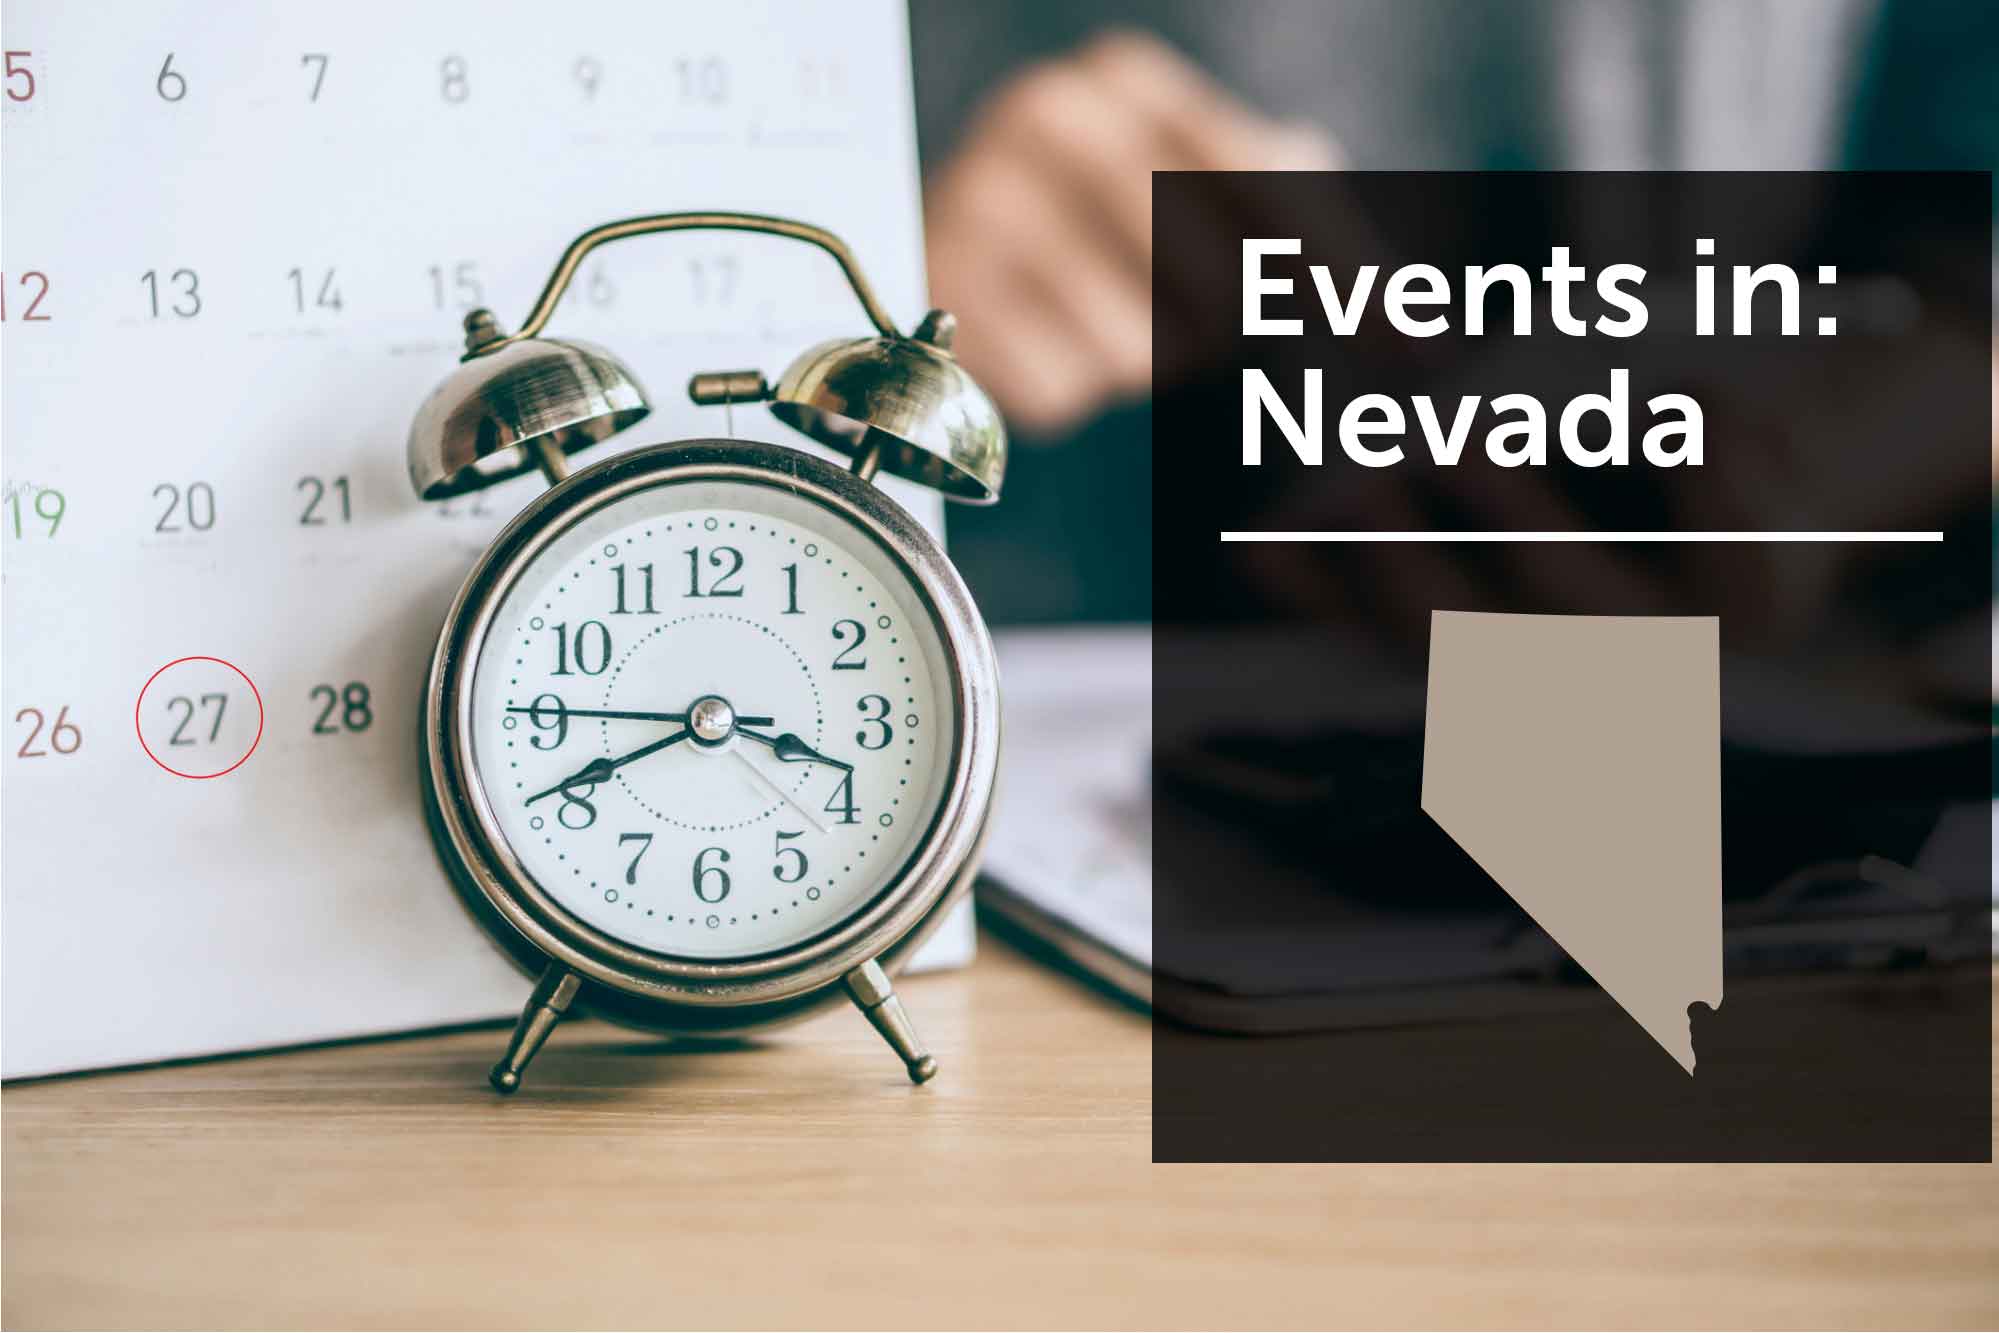 Women's business events in Nevada